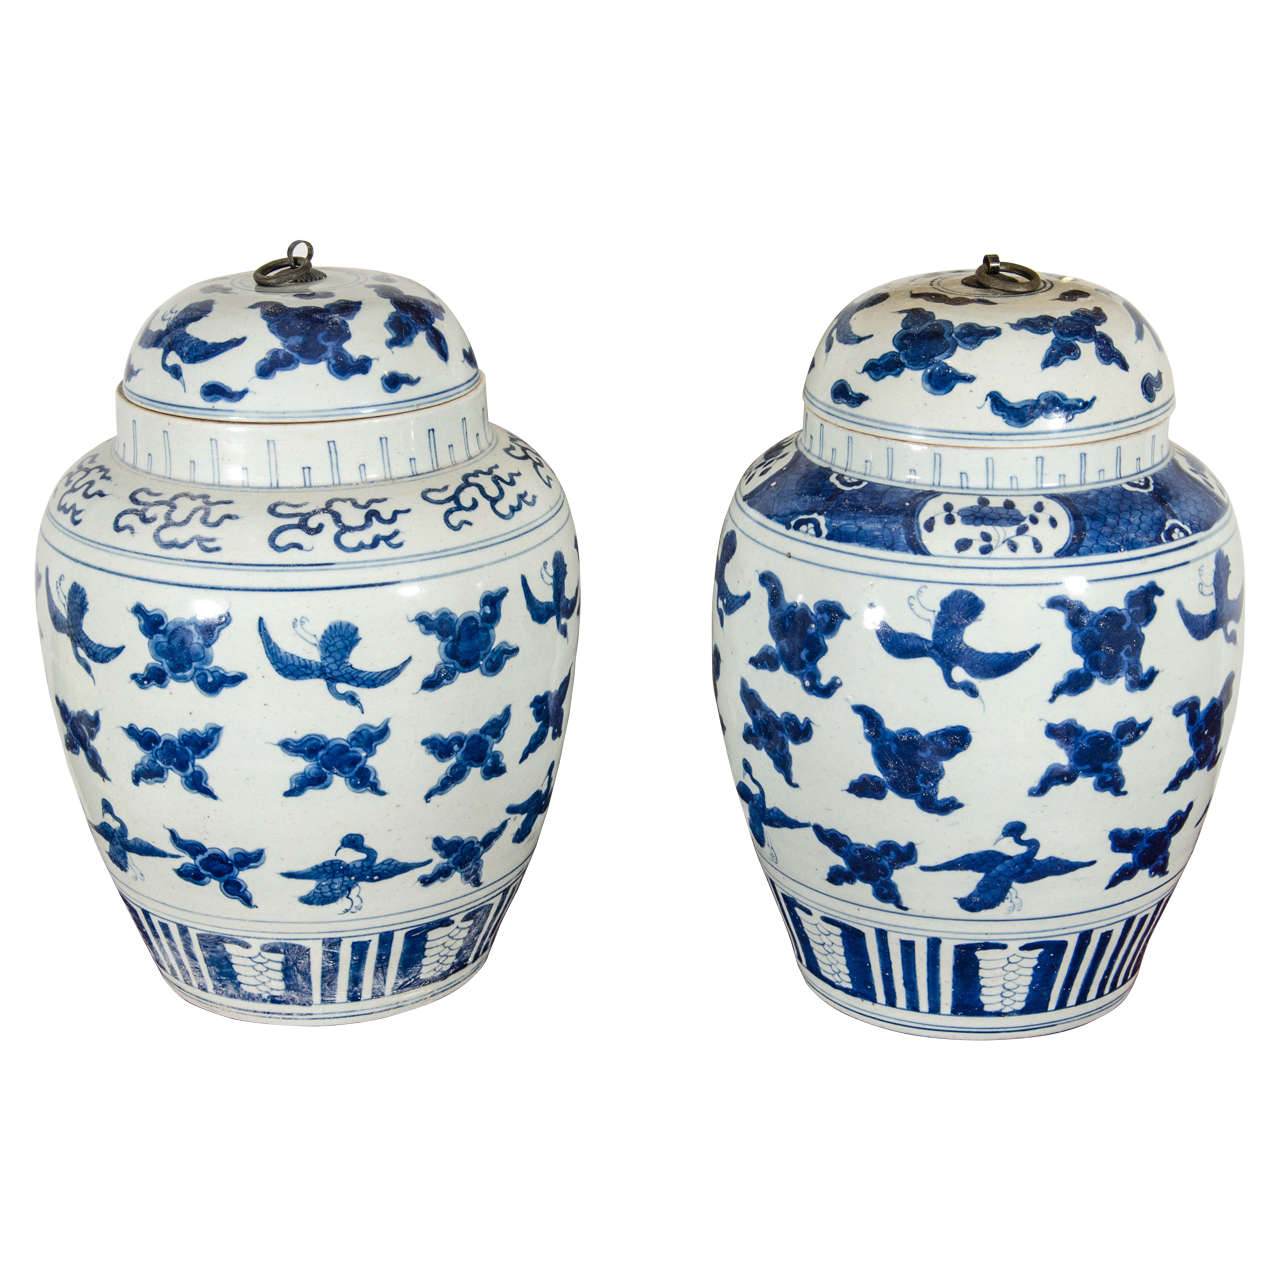 Pair of Chinese export porcelain ginger jars, mid-20th century